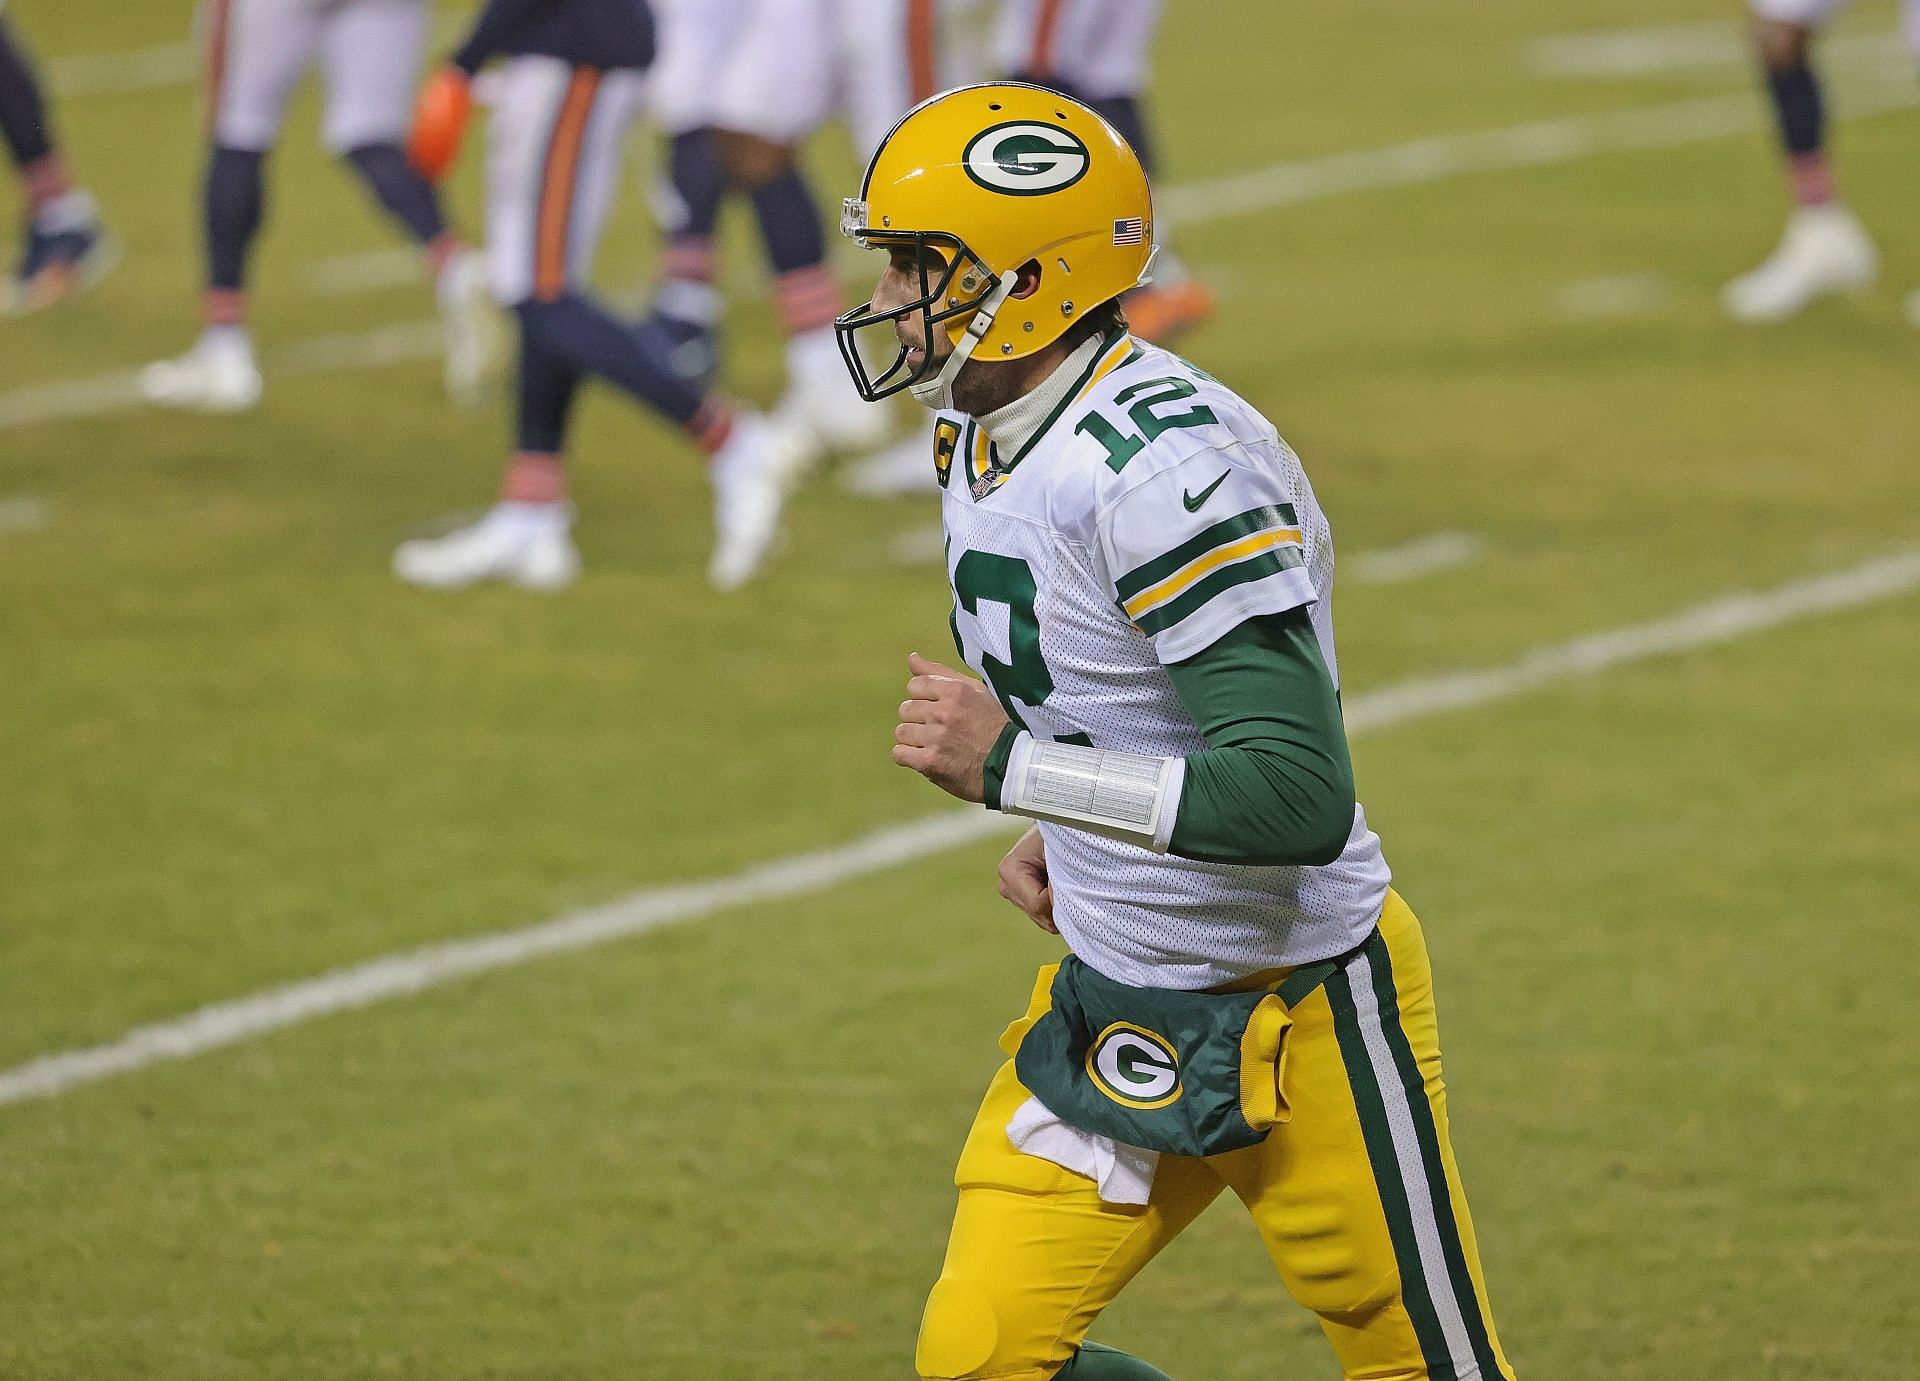 The Packers face the Bears in Week 6 on the NFL season